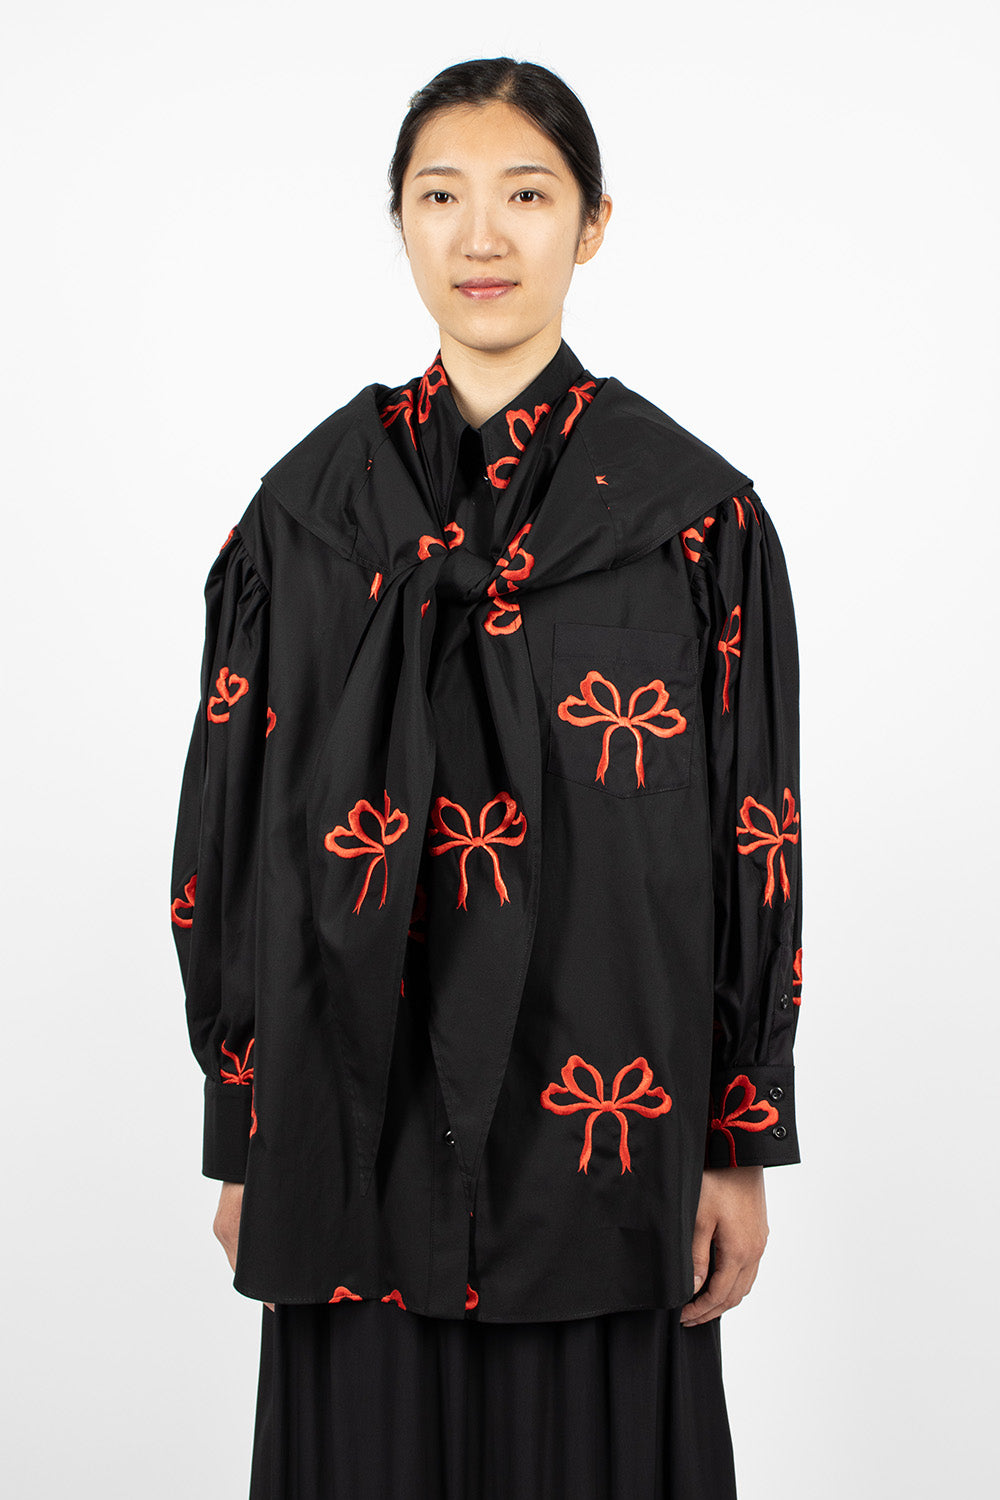 Bow Embroidered Shirt Black/Red